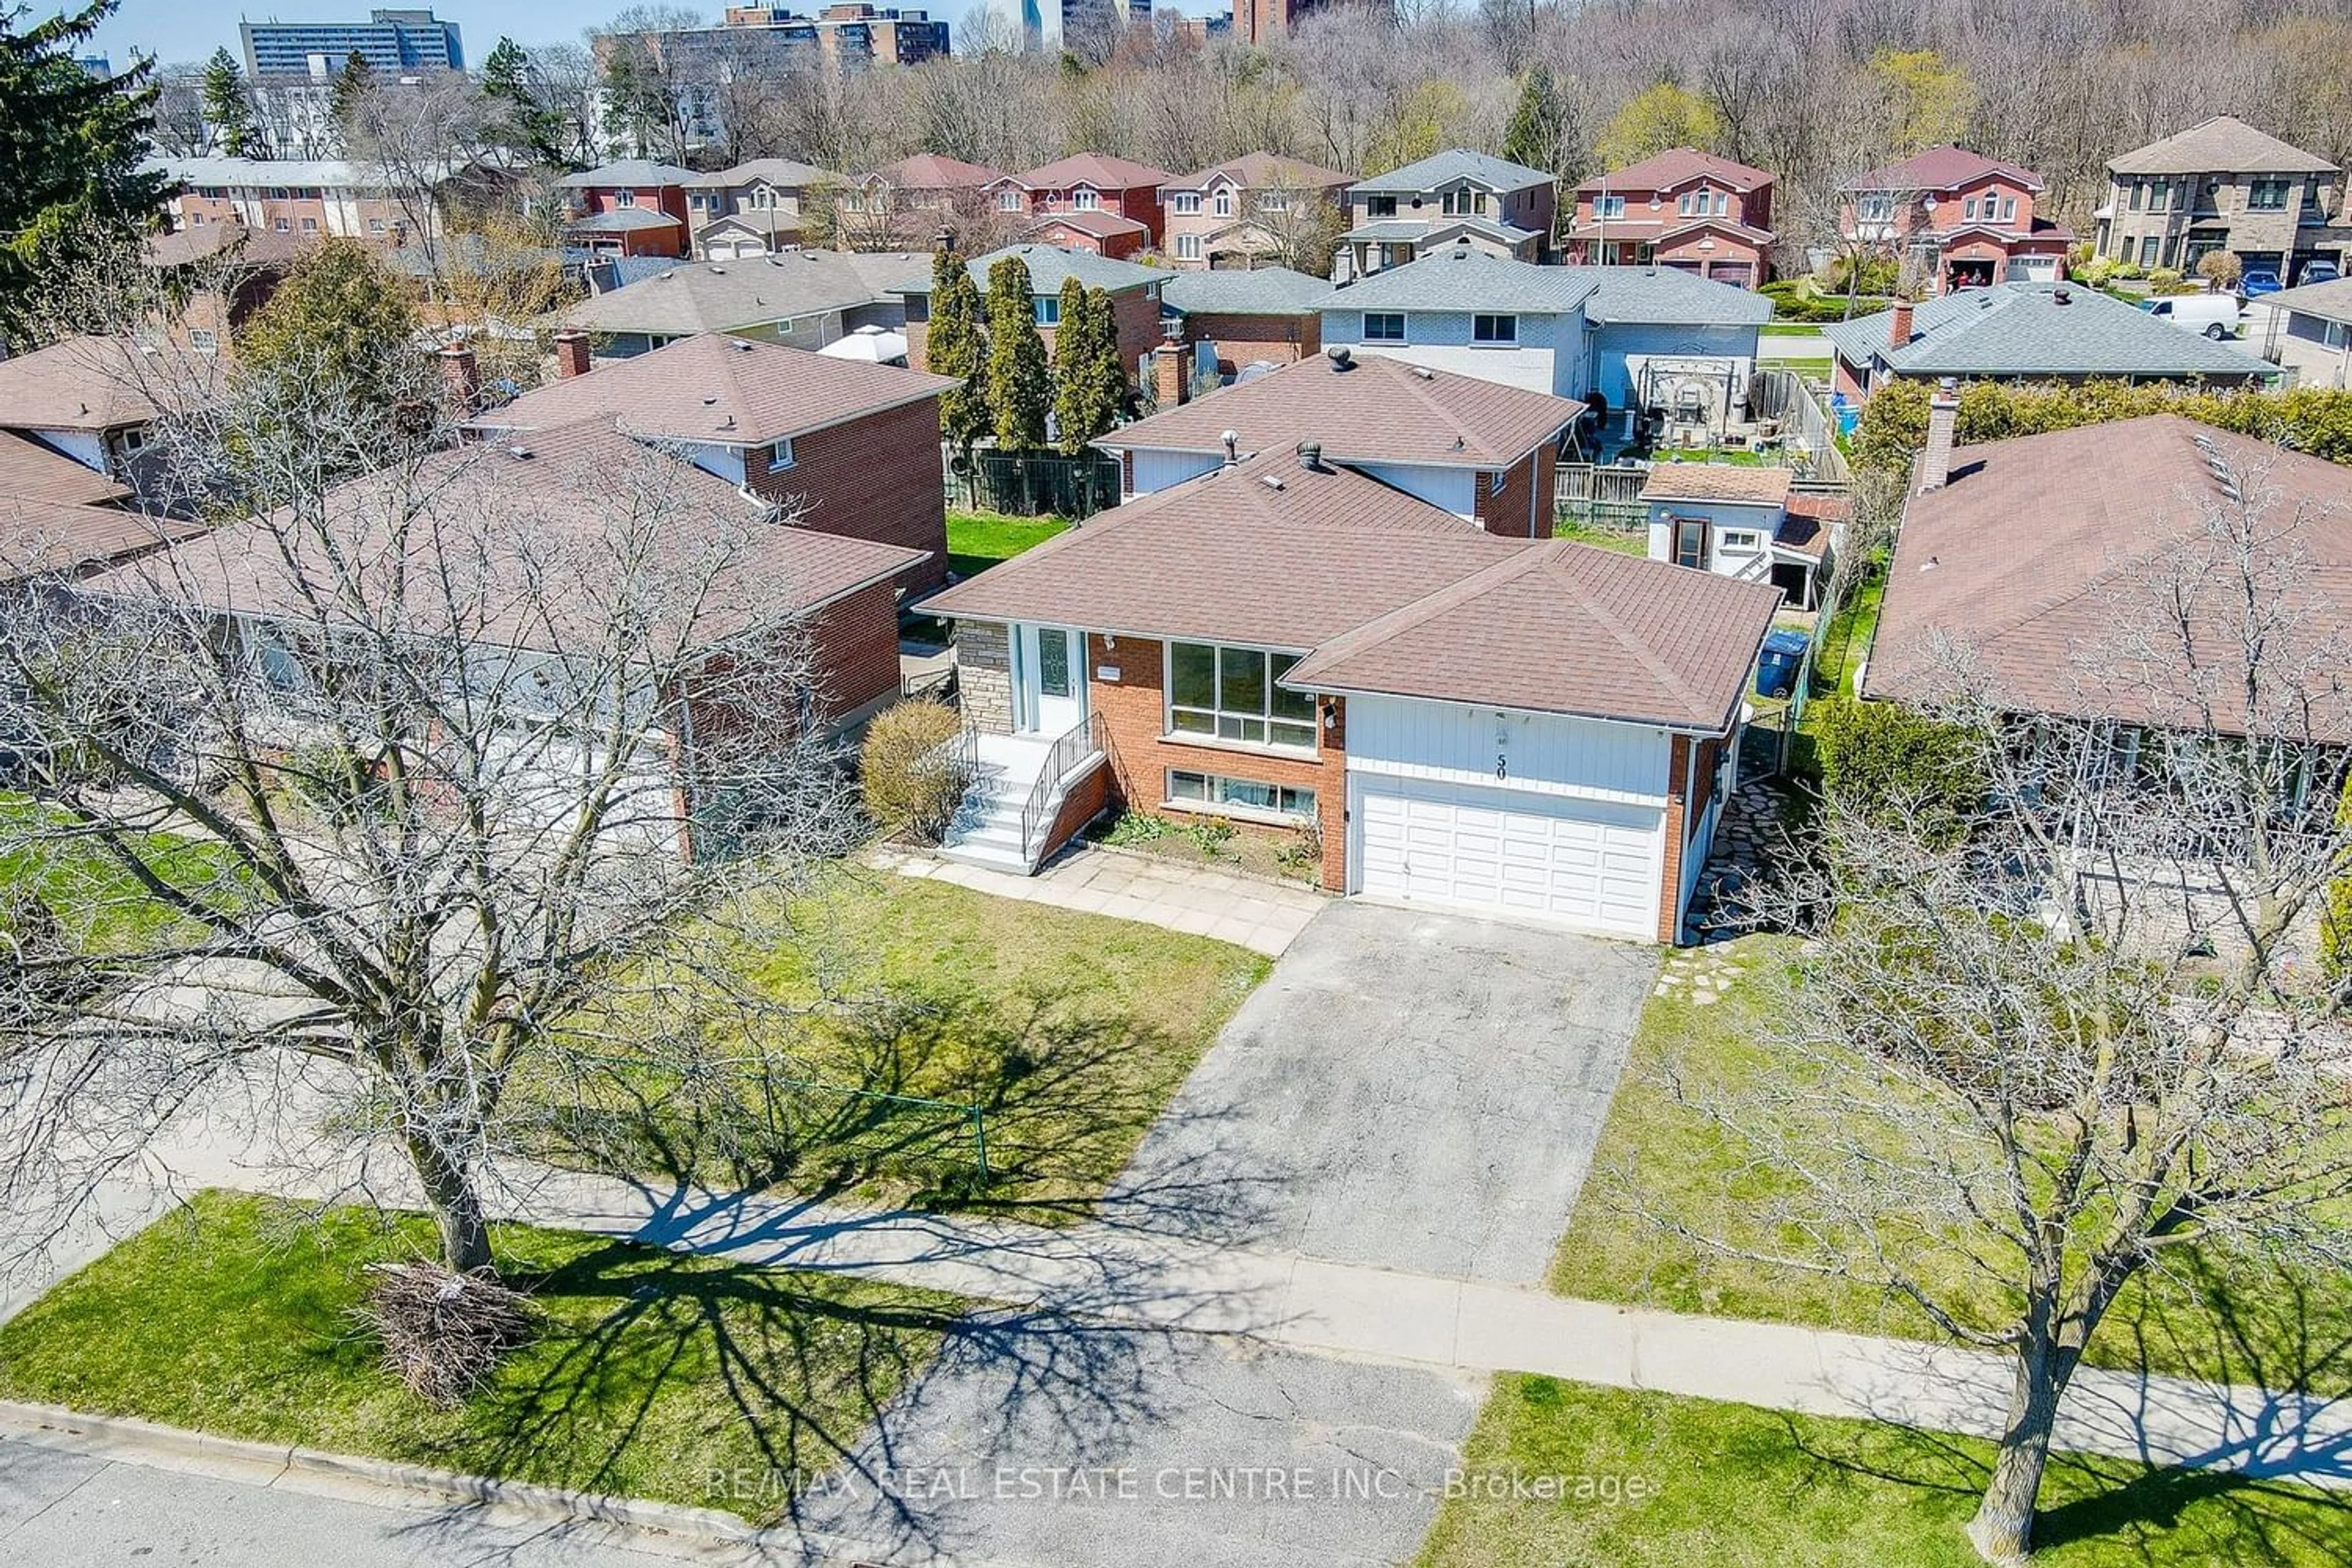 Frontside or backside of a home for 50 Budworth Dr, Toronto Ontario M1E 3H9